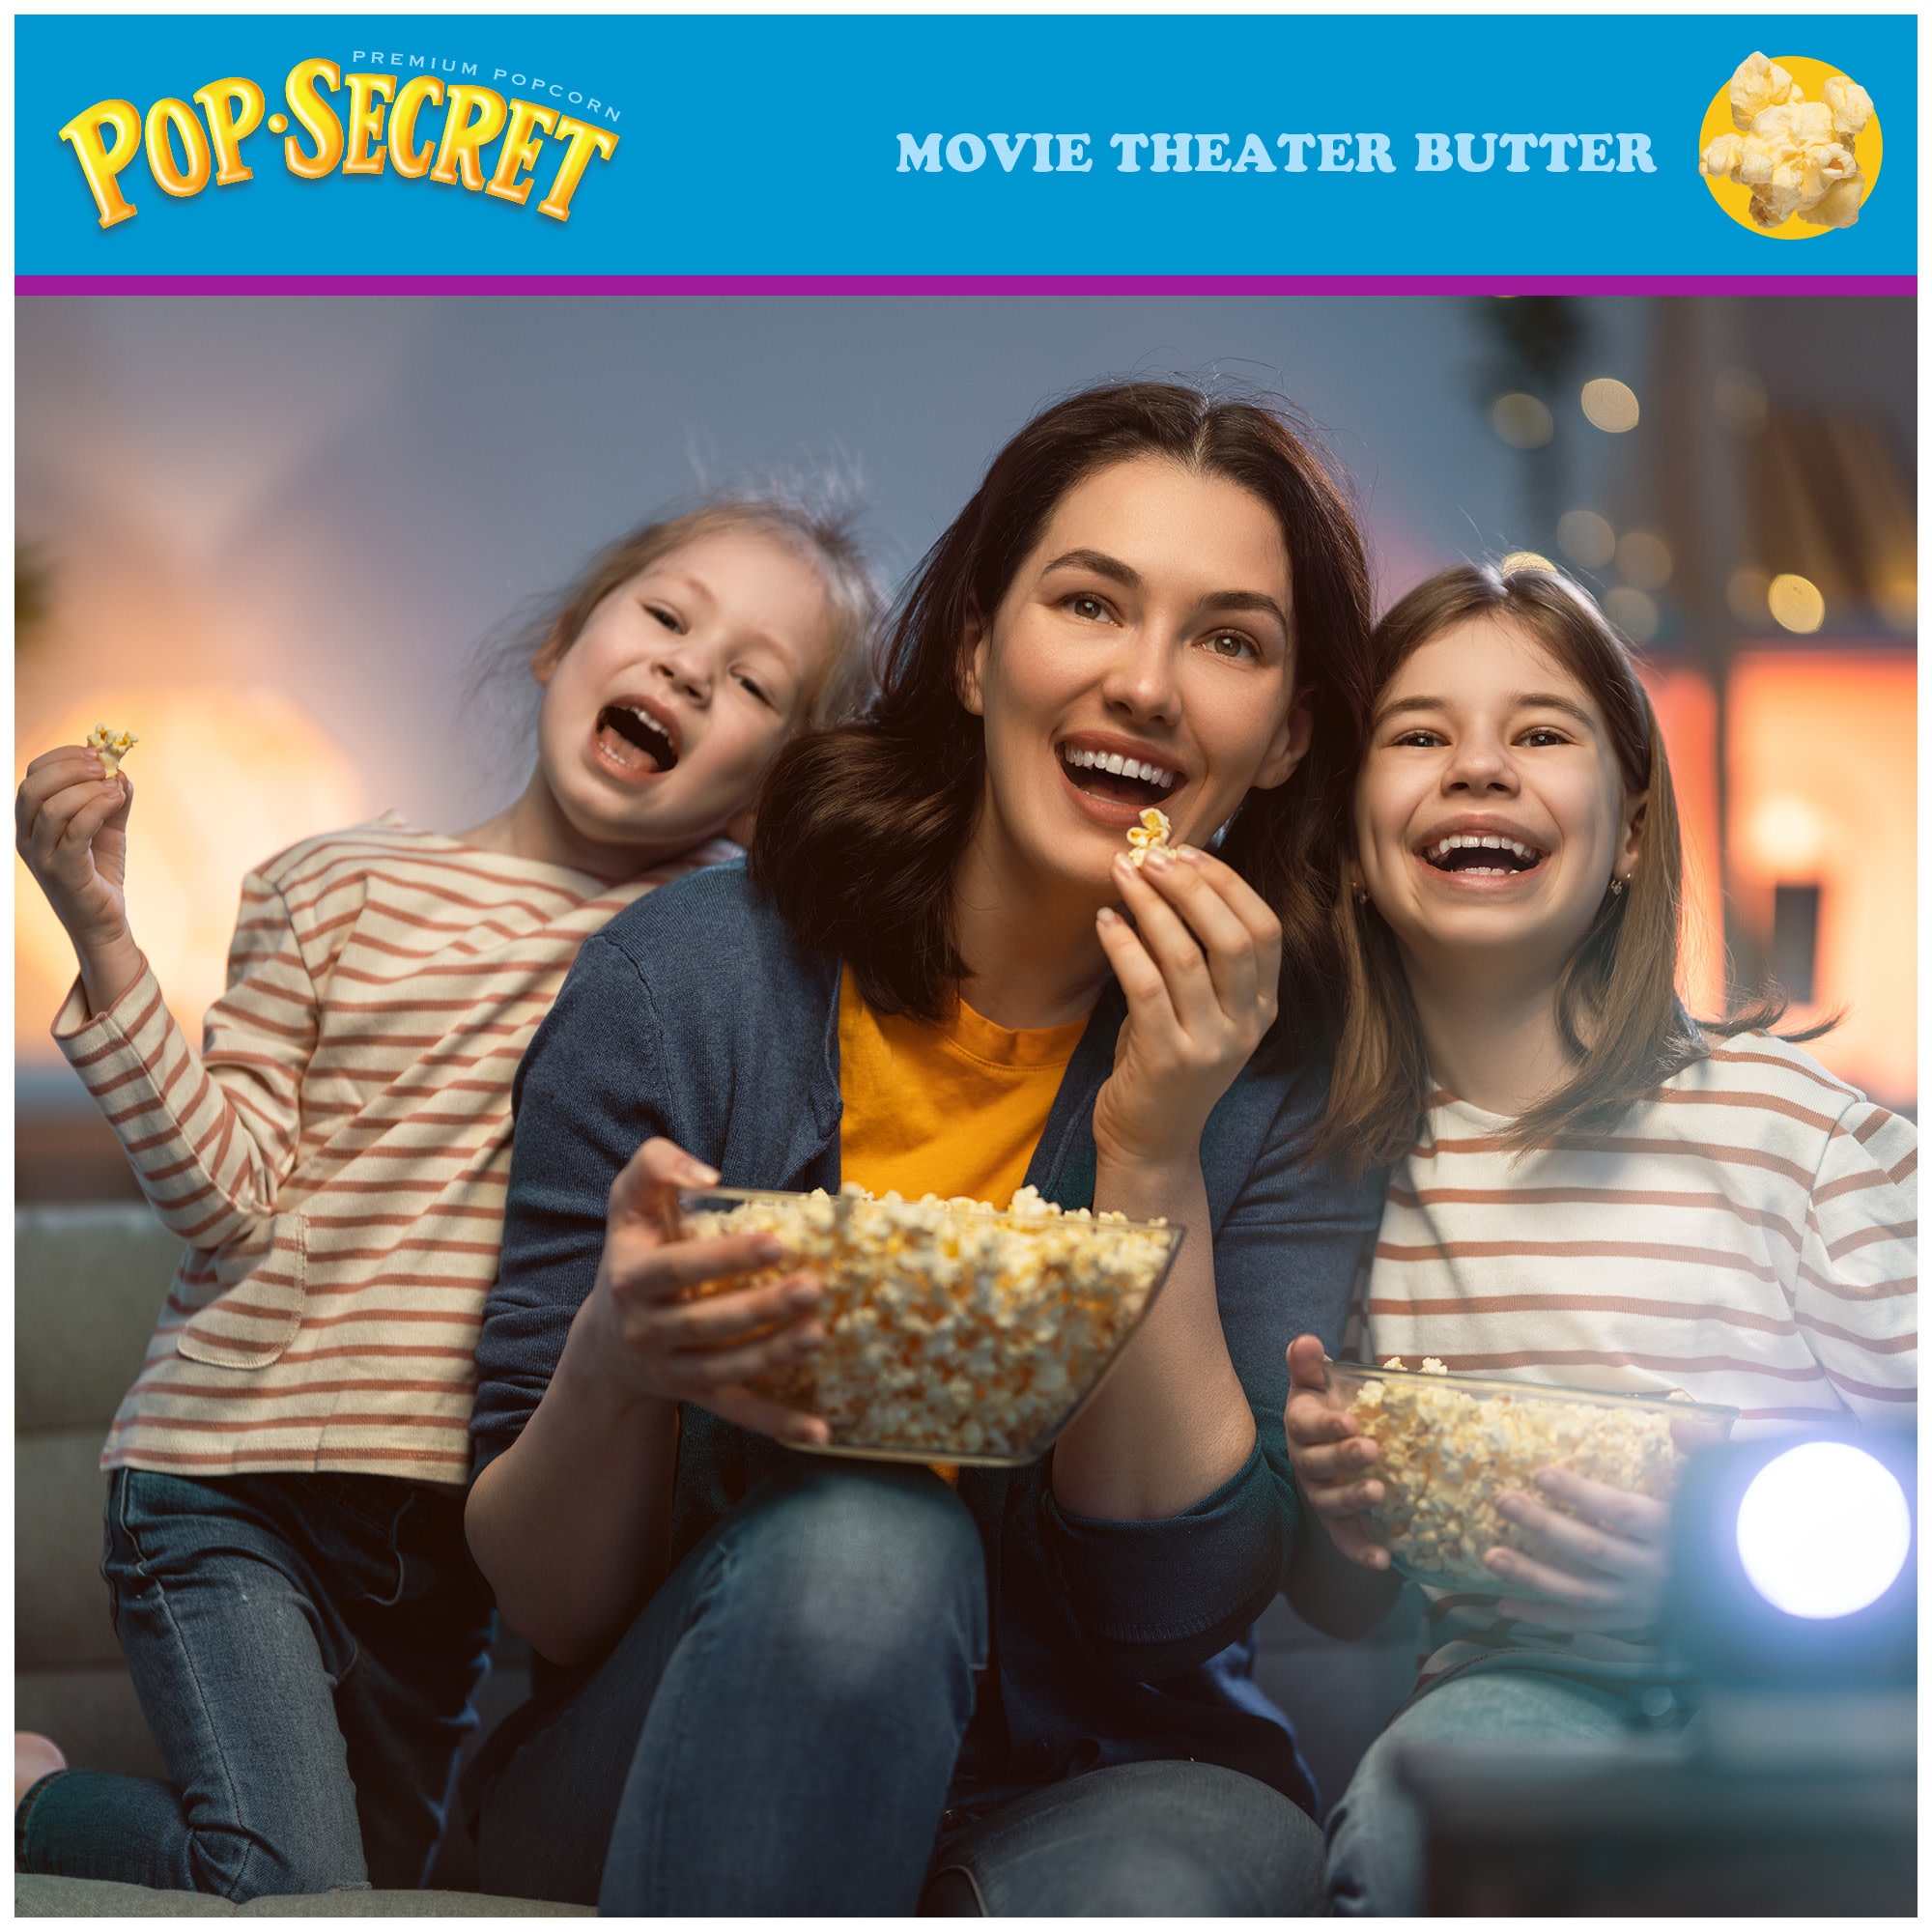 Pop Secret Microwave Popcorn, Movie Theater Butter, Flavor, 3 oz Sharing Bags, 12 Ct - image 4 of 10